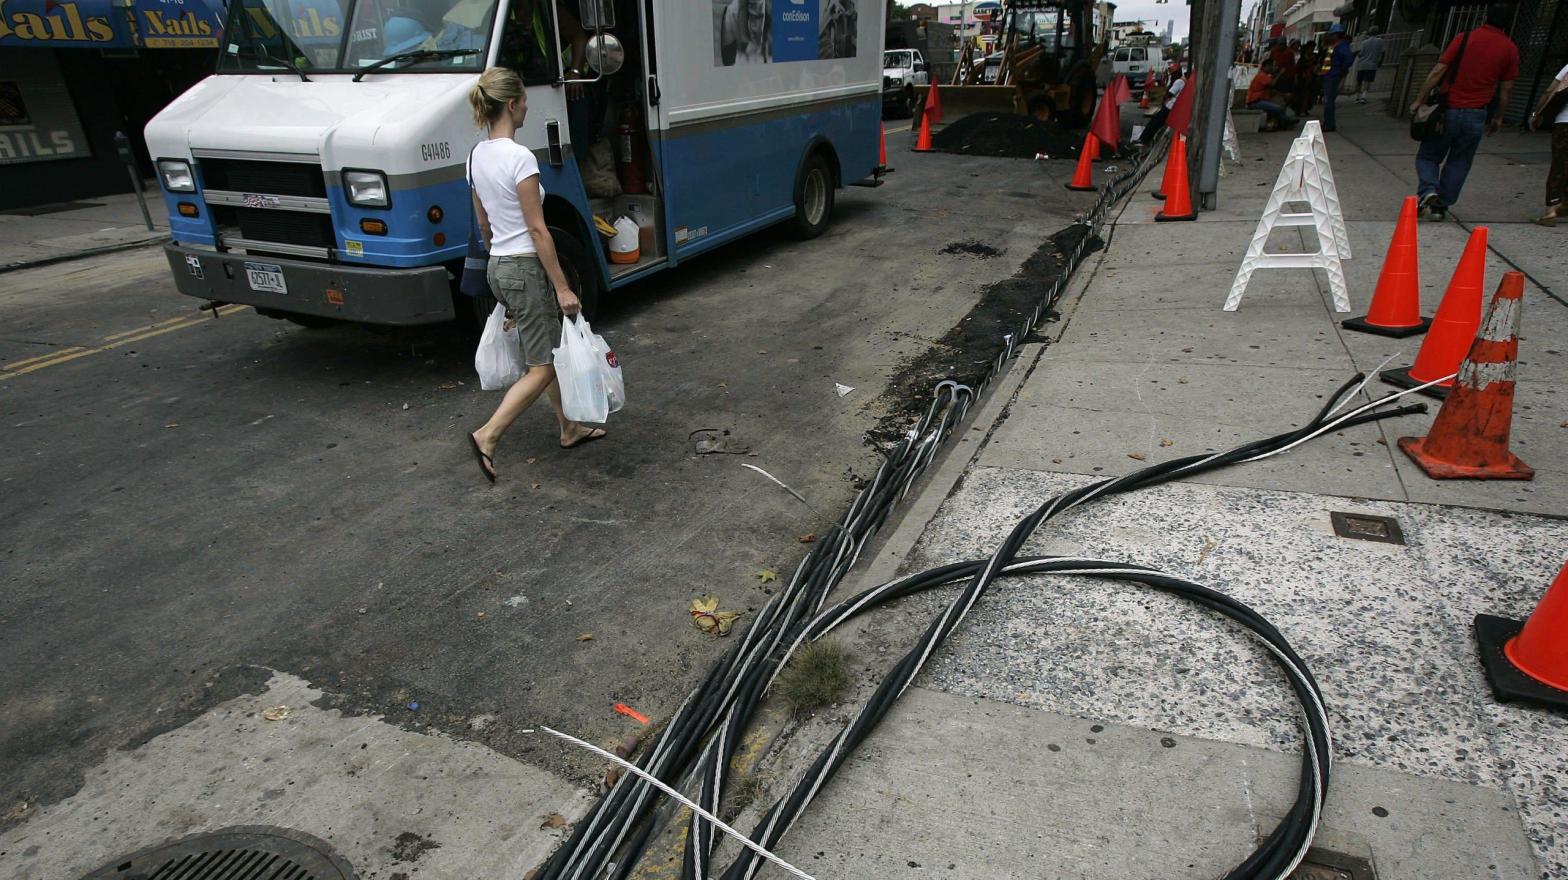 A woman walks past power lines on the footpath as workers try to restore electrical service July 23, 2006 in the Queens borough of New York City.  (Photo: Chris Hondros, Getty Images)